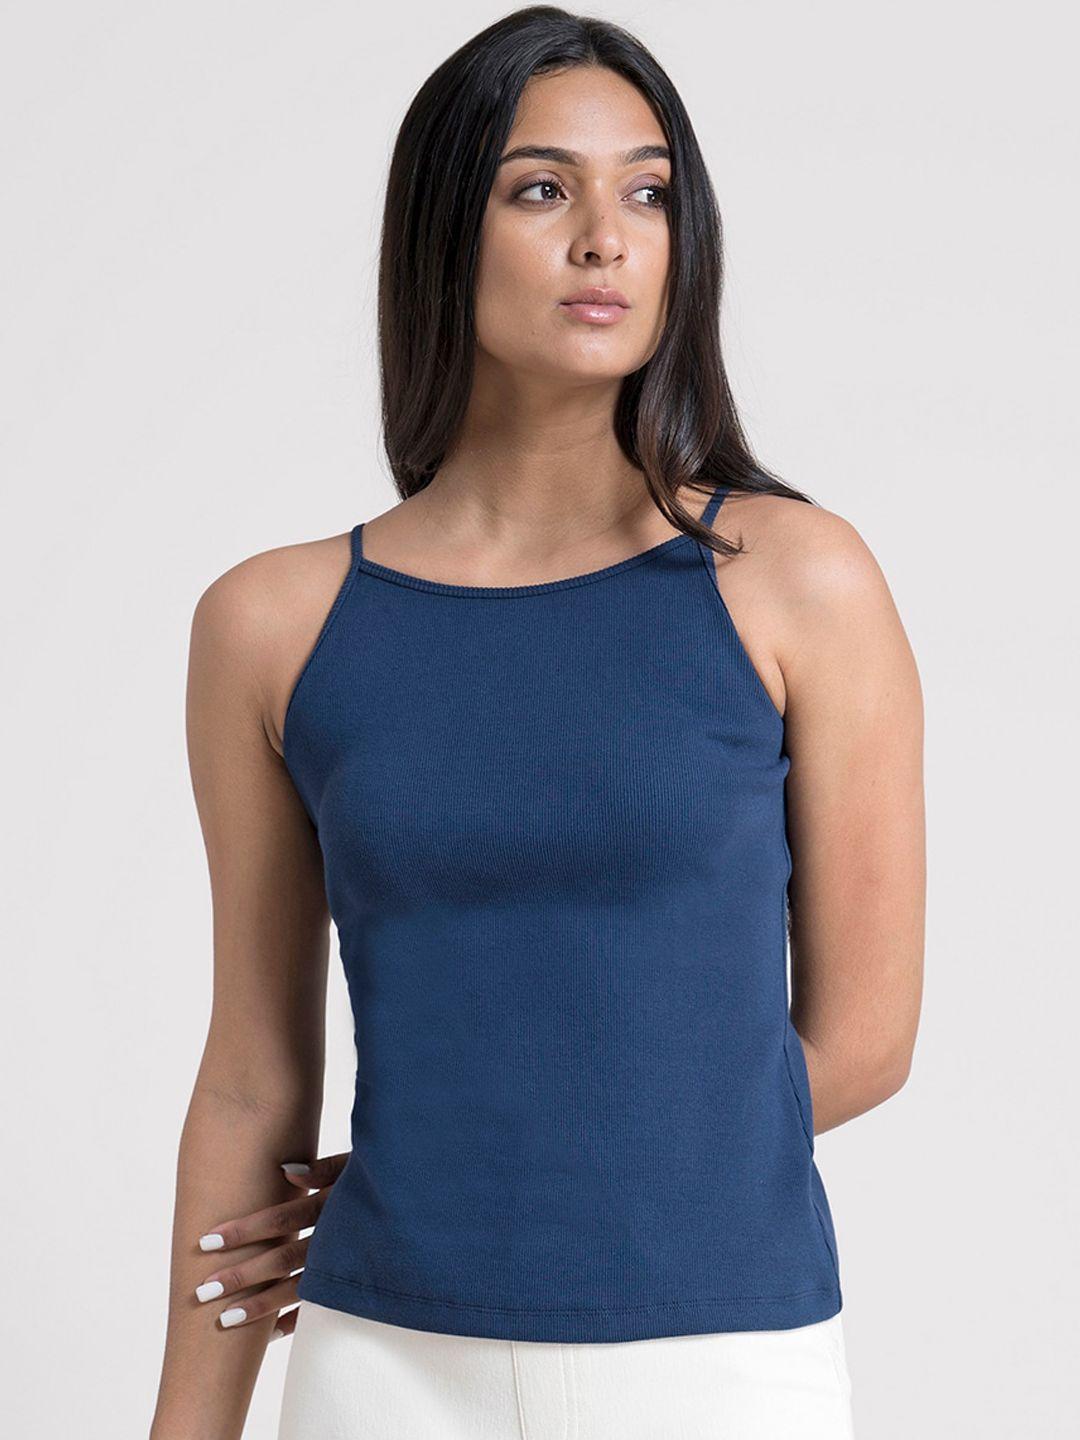 fablestreet women blue solid cotton camisole